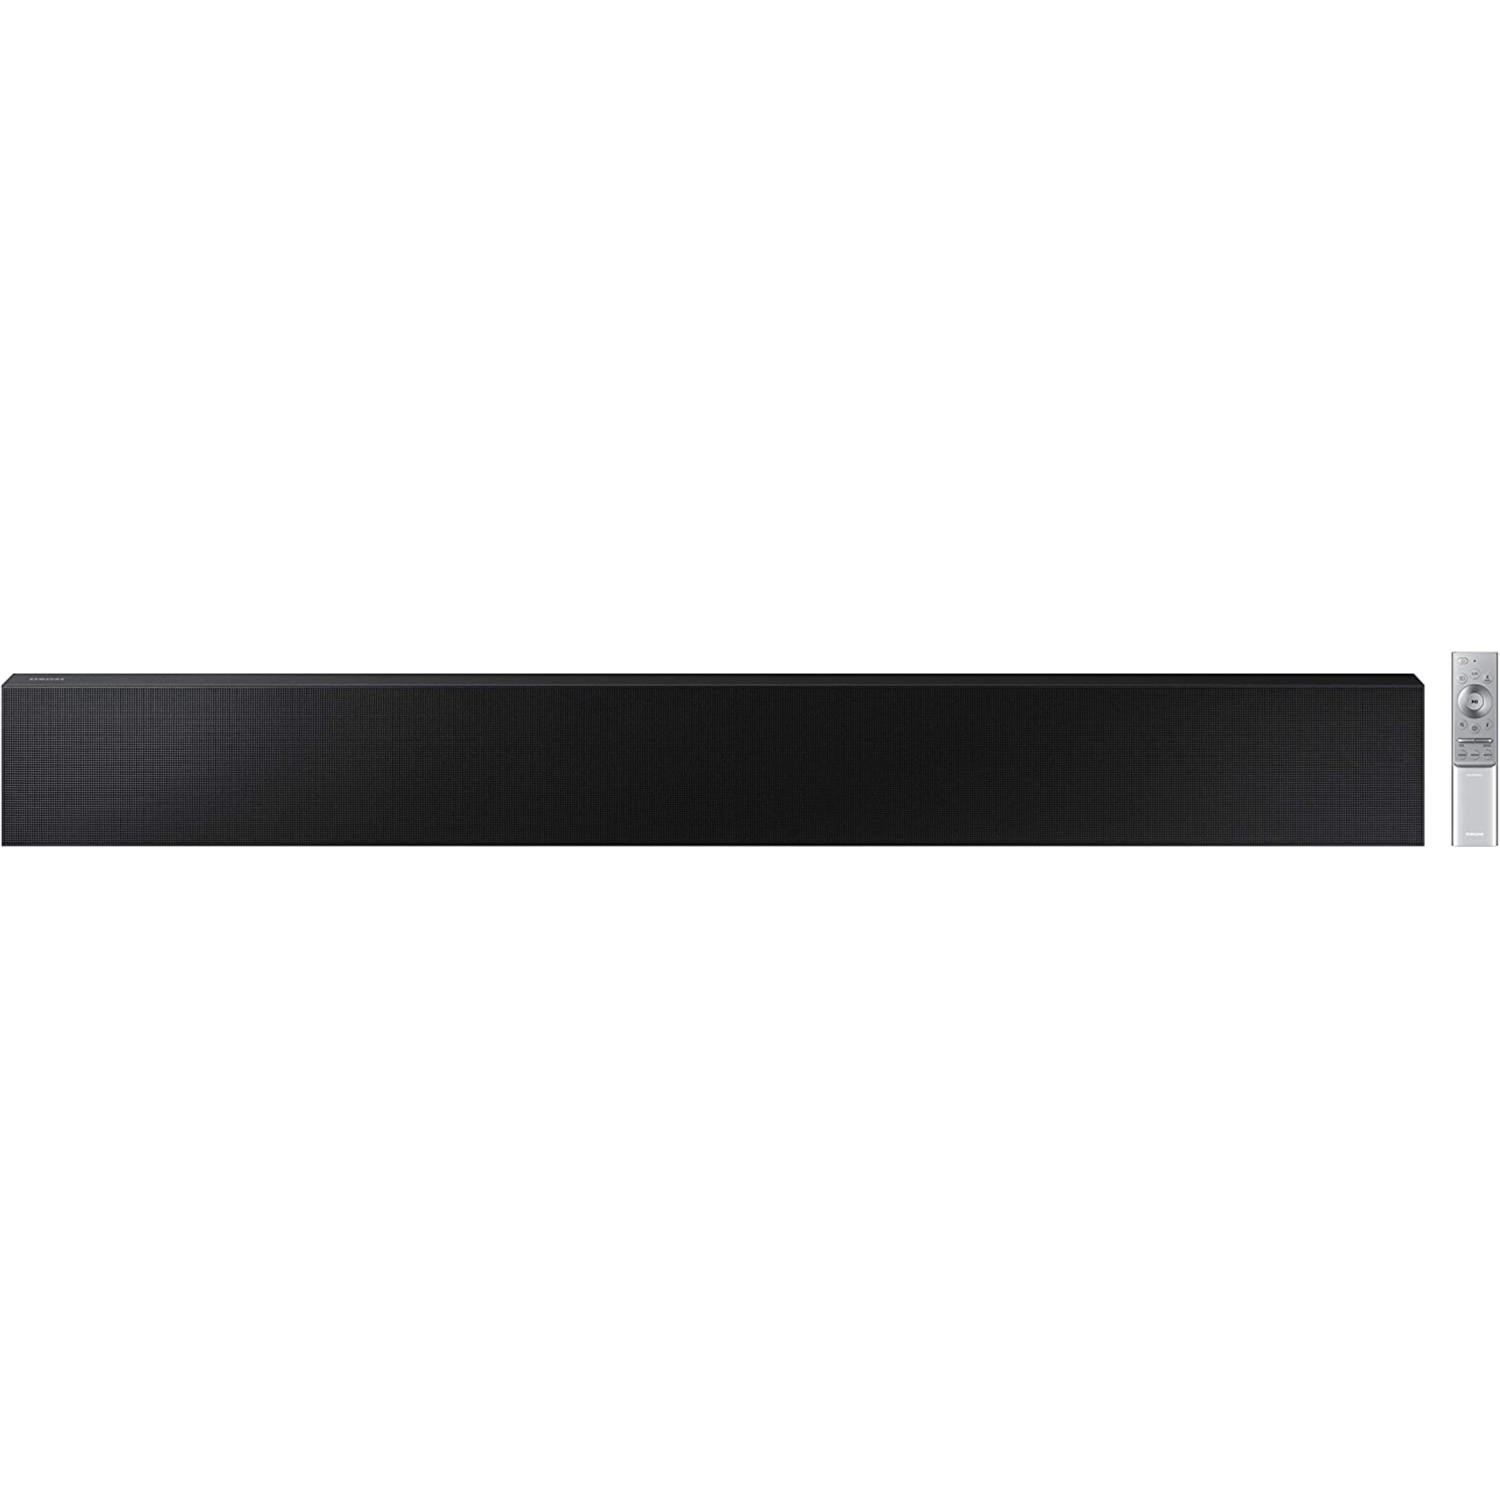 SAMSUNG 5.1ch Terrace Outdoor Soundbar - Dolby (HW-LST70T) - Open Box - 10/10 Condition